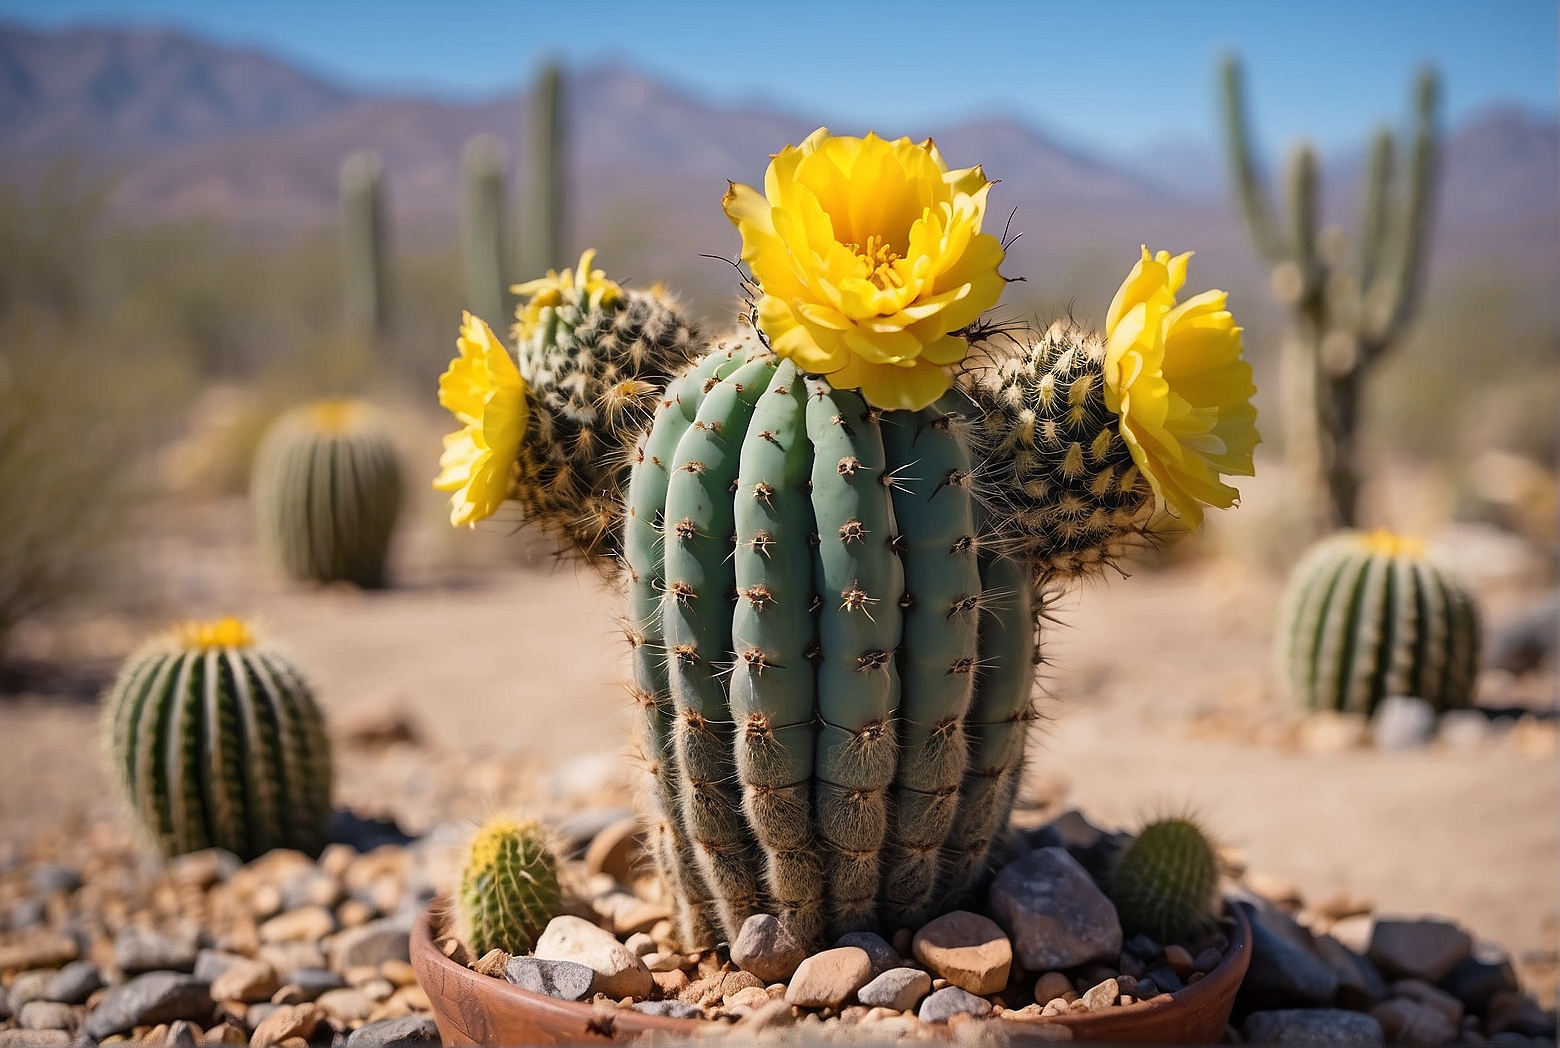 A Step-by-Step Guide to Growing Saguaro Cactus from Seed